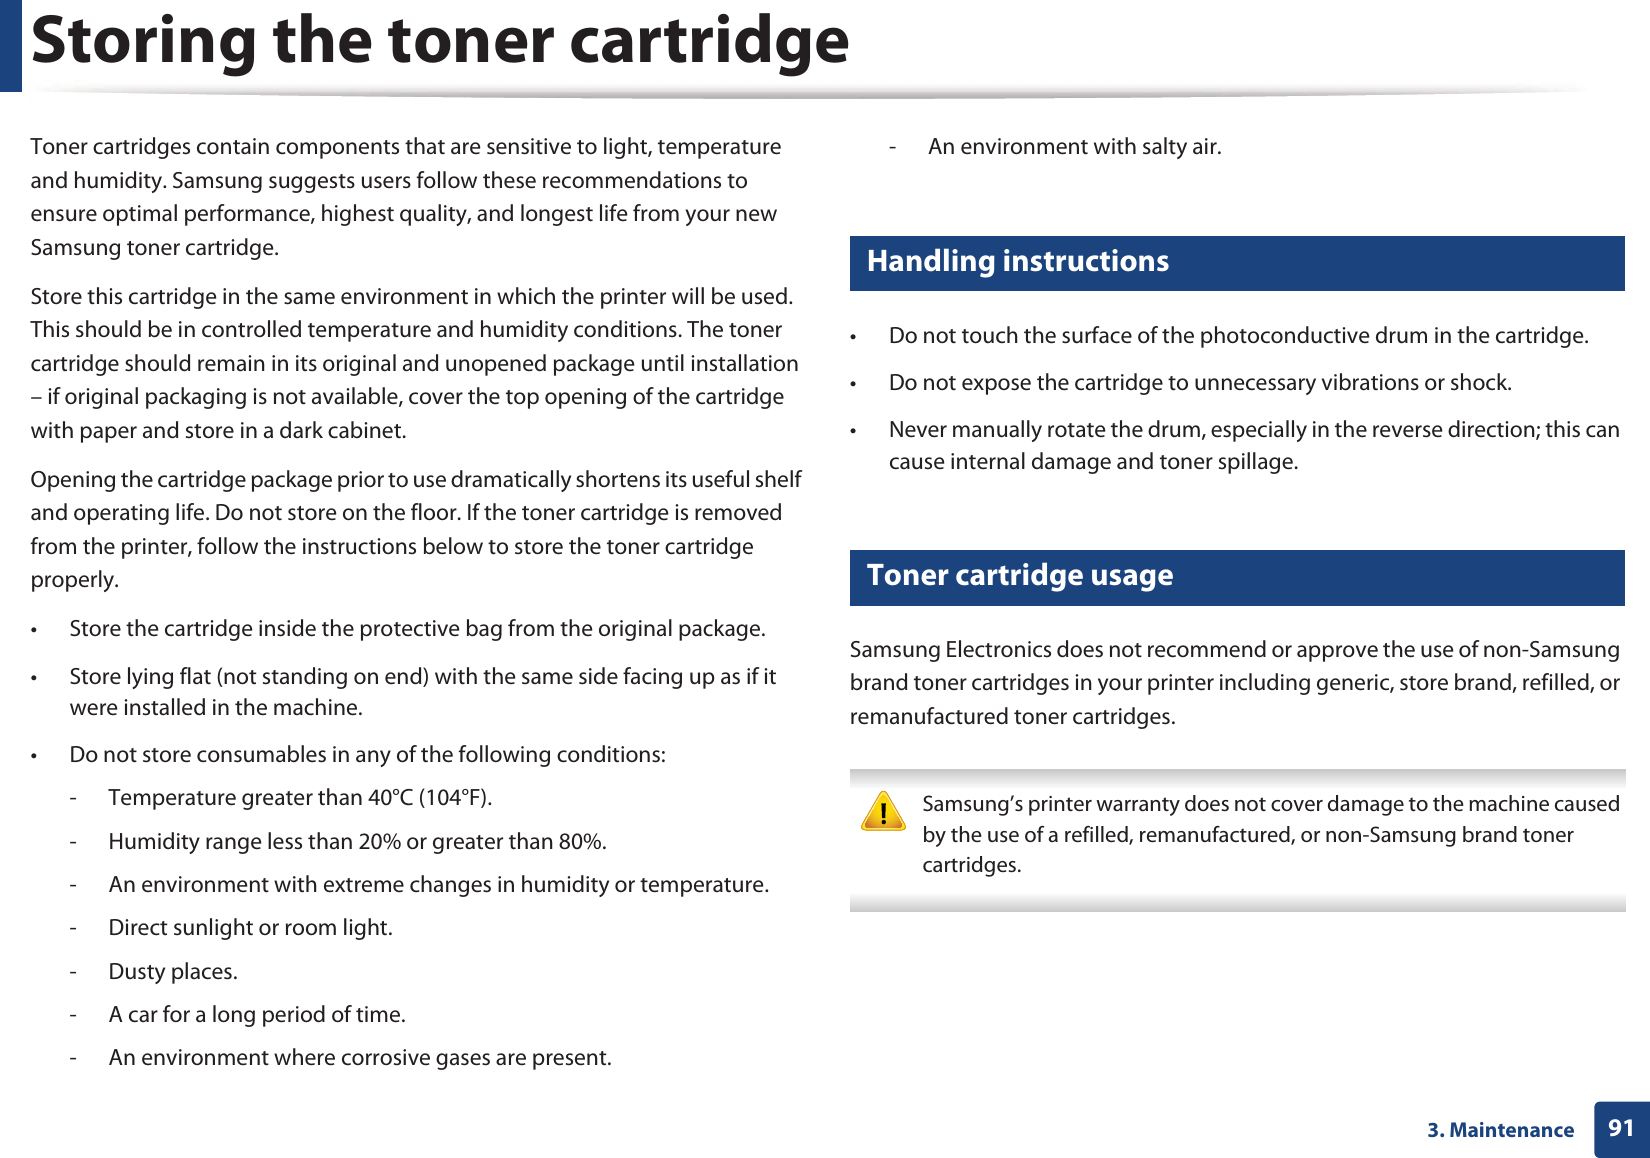 913. MaintenanceStoring the toner cartridgeToner cartridges contain components that are sensitive to light, temperature and humidity. Samsung suggests users follow these recommendations to ensure optimal performance, highest quality, and longest life from your new Samsung toner cartridge.Store this cartridge in the same environment in which the printer will be used. This should be in controlled temperature and humidity conditions. The toner cartridge should remain in its original and unopened package until installation – if original packaging is not available, cover the top opening of the cartridge with paper and store in a dark cabinet.Opening the cartridge package prior to use dramatically shortens its useful shelf and operating life. Do not store on the floor. If the toner cartridge is removed from the printer, follow the instructions below to store the toner cartridge properly.• Store the cartridge inside the protective bag from the original package. • Store lying flat (not standing on end) with the same side facing up as if it were installed in the machine.• Do not store consumables in any of the following conditions:- Temperature greater than 40°C (104°F).- Humidity range less than 20% or greater than 80%.- An environment with extreme changes in humidity or temperature.- Direct sunlight or room light.- Dusty places.- A car for a long period of time.- An environment where corrosive gases are present.- An environment with salty air.1 Handling instructions• Do not touch the surface of the photoconductive drum in the cartridge.• Do not expose the cartridge to unnecessary vibrations or shock.• Never manually rotate the drum, especially in the reverse direction; this can cause internal damage and toner spillage.2 Toner cartridge usageSamsung Electronics does not recommend or approve the use of non-Samsung brand toner cartridges in your printer including generic, store brand, refilled, or remanufactured toner cartridges. Samsung’s printer warranty does not cover damage to the machine caused by the use of a refilled, remanufactured, or non-Samsung brand toner cartridges. 